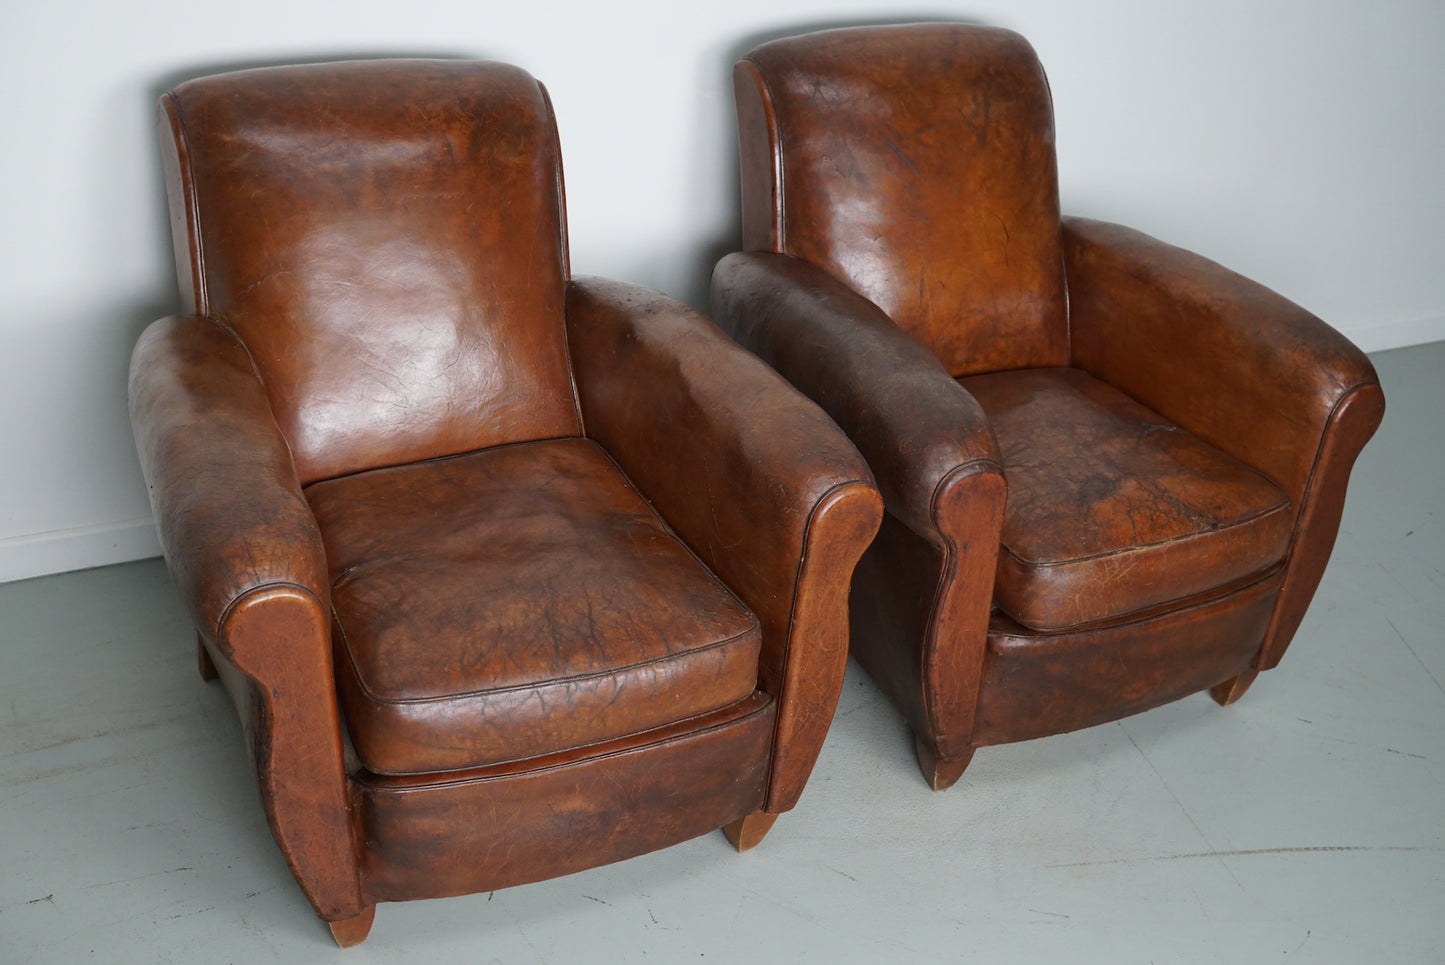 Pair of Vintage French Cognac Leather Club Chairs, Set of 2